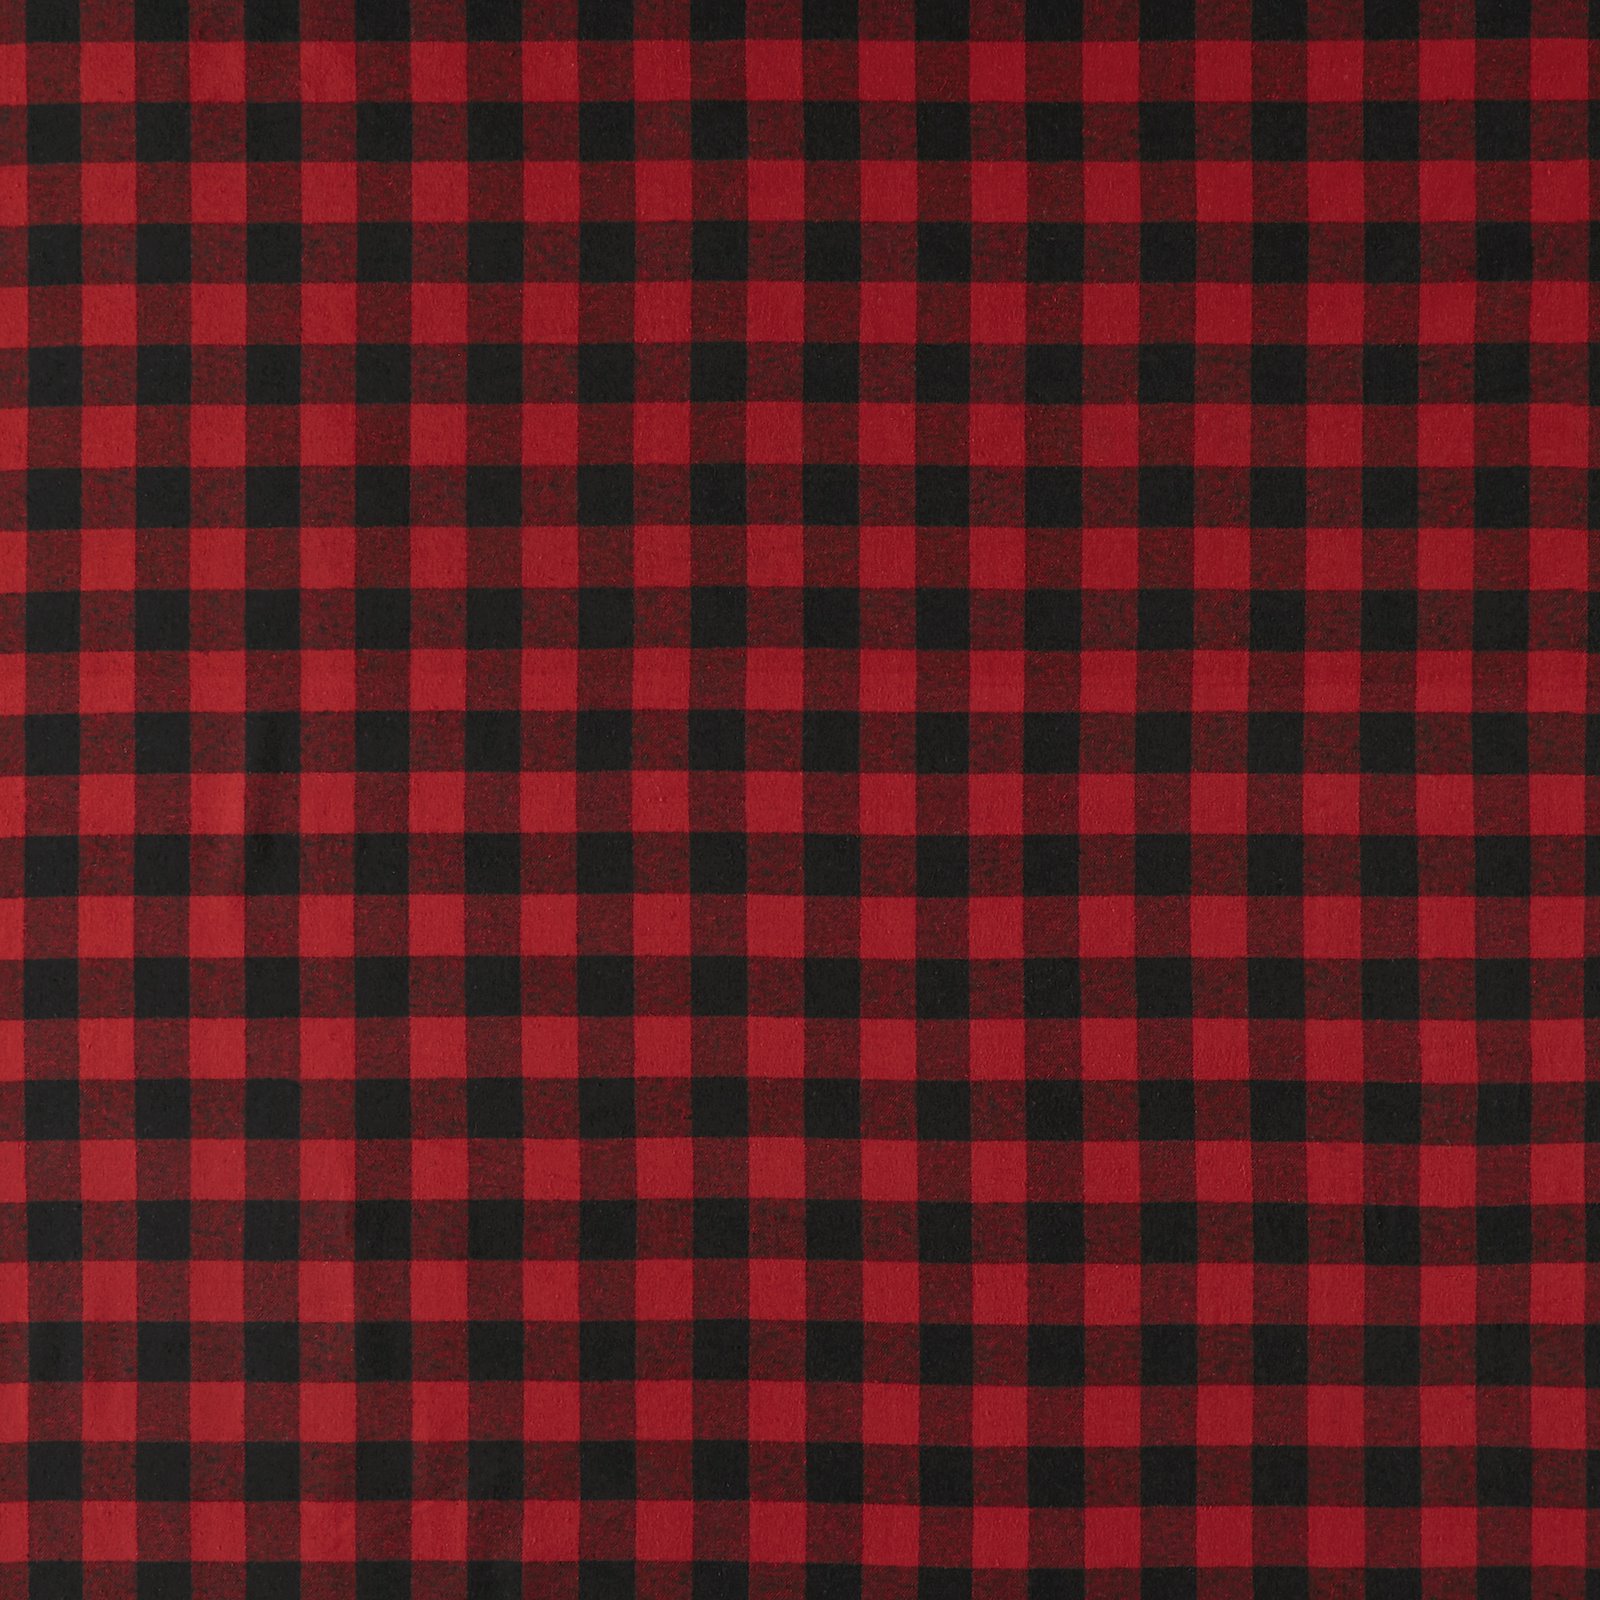 Woven cotton red/black YD check 502048_pack_sp